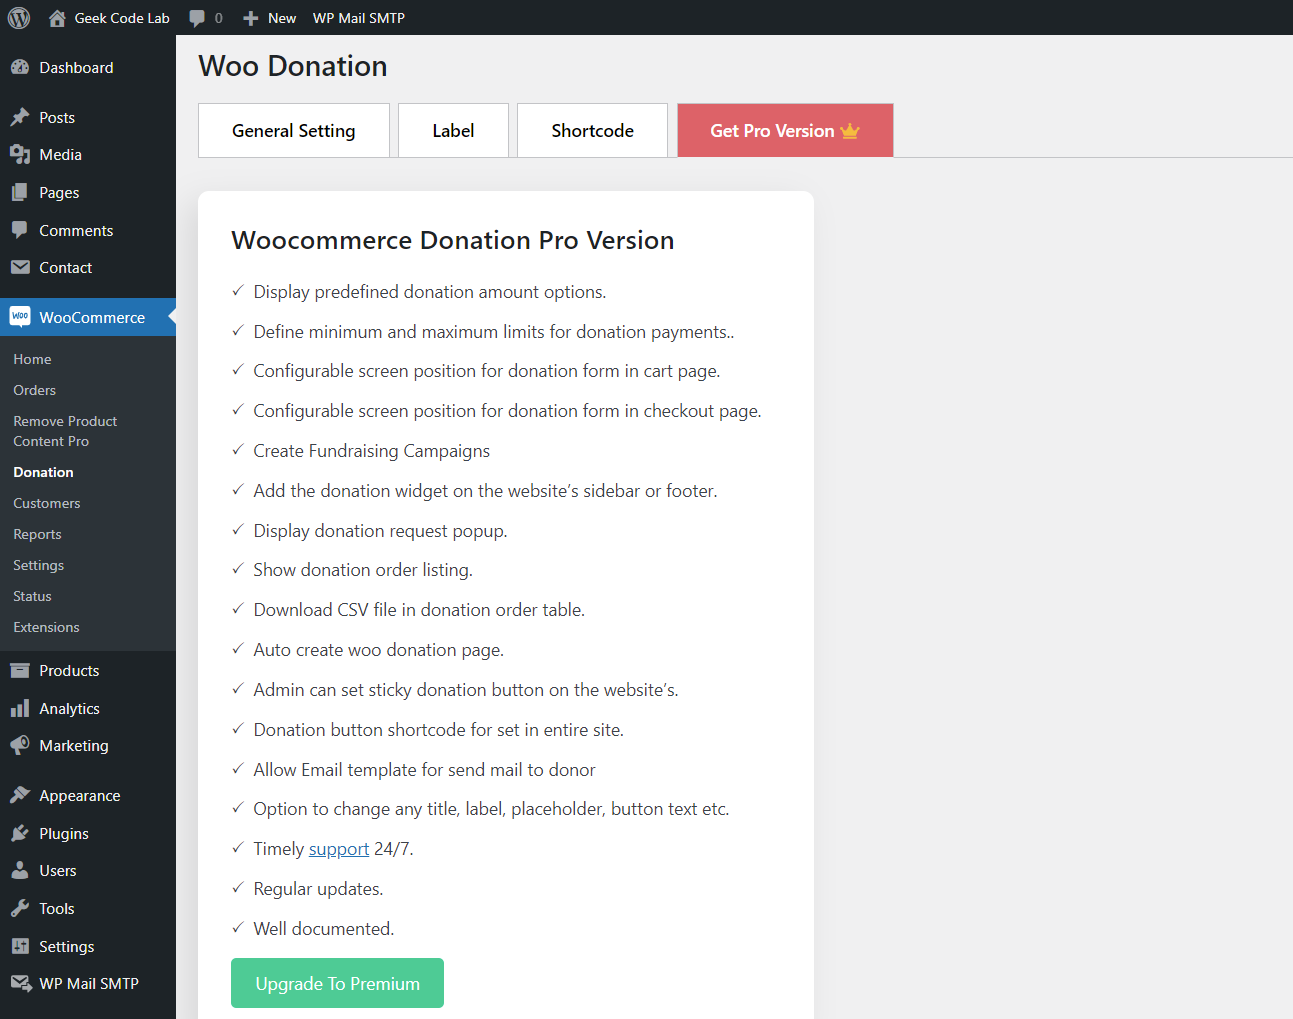 Woo Donation Pro Features